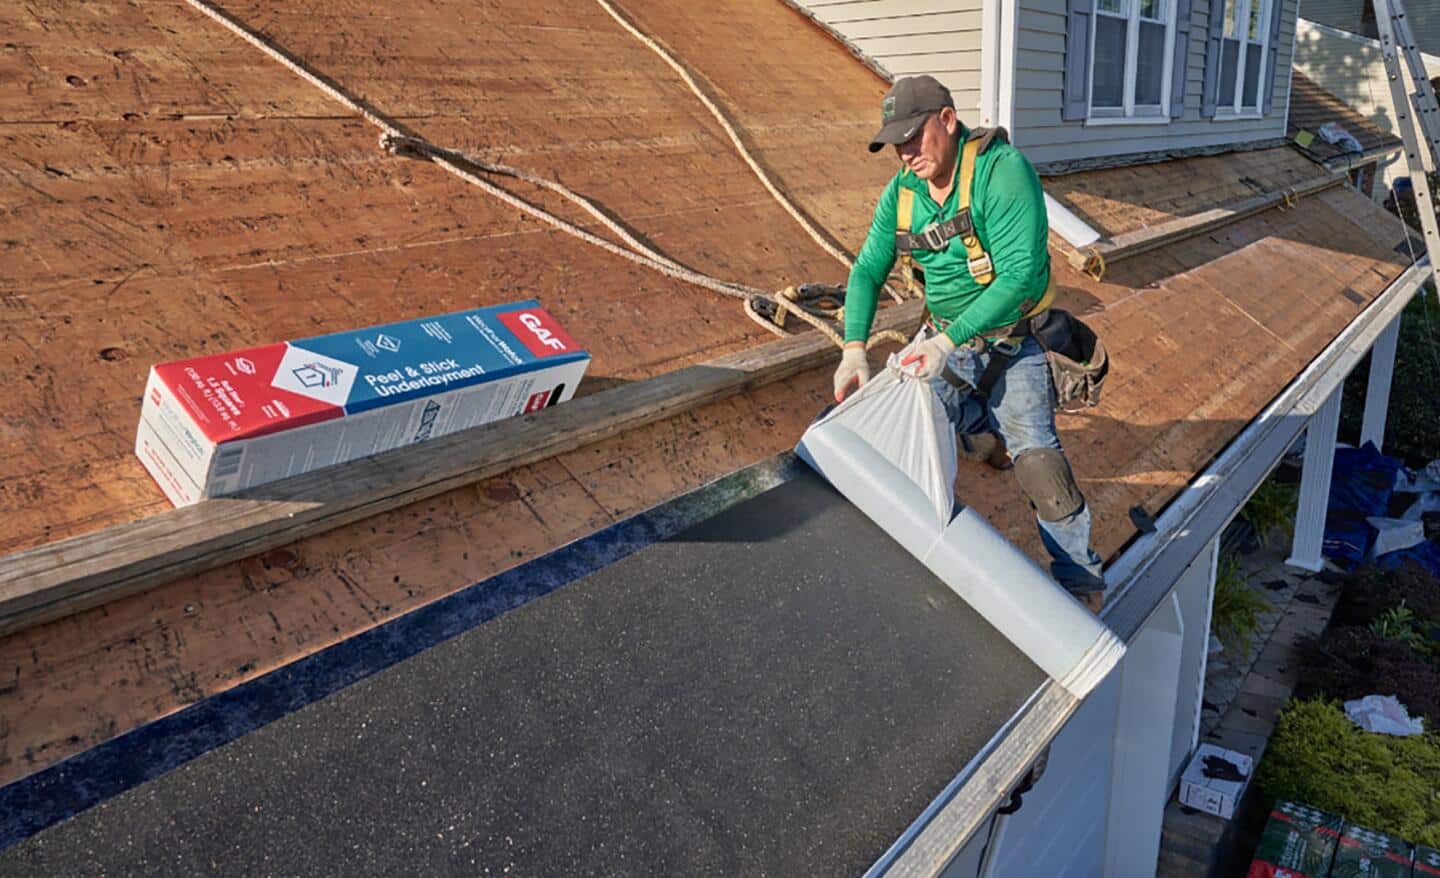 A worker rolls out membrane roofing material on a rooftop.